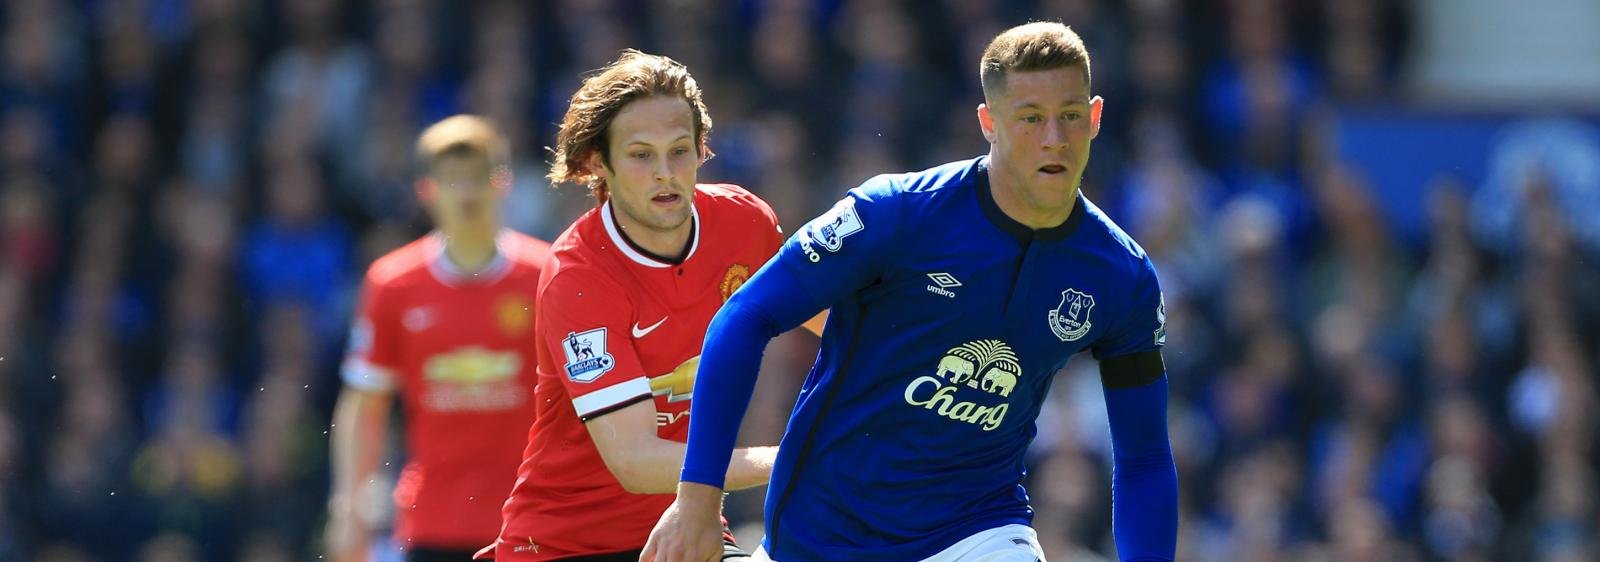 Game of the Weekend History: Everton vs Manchester United